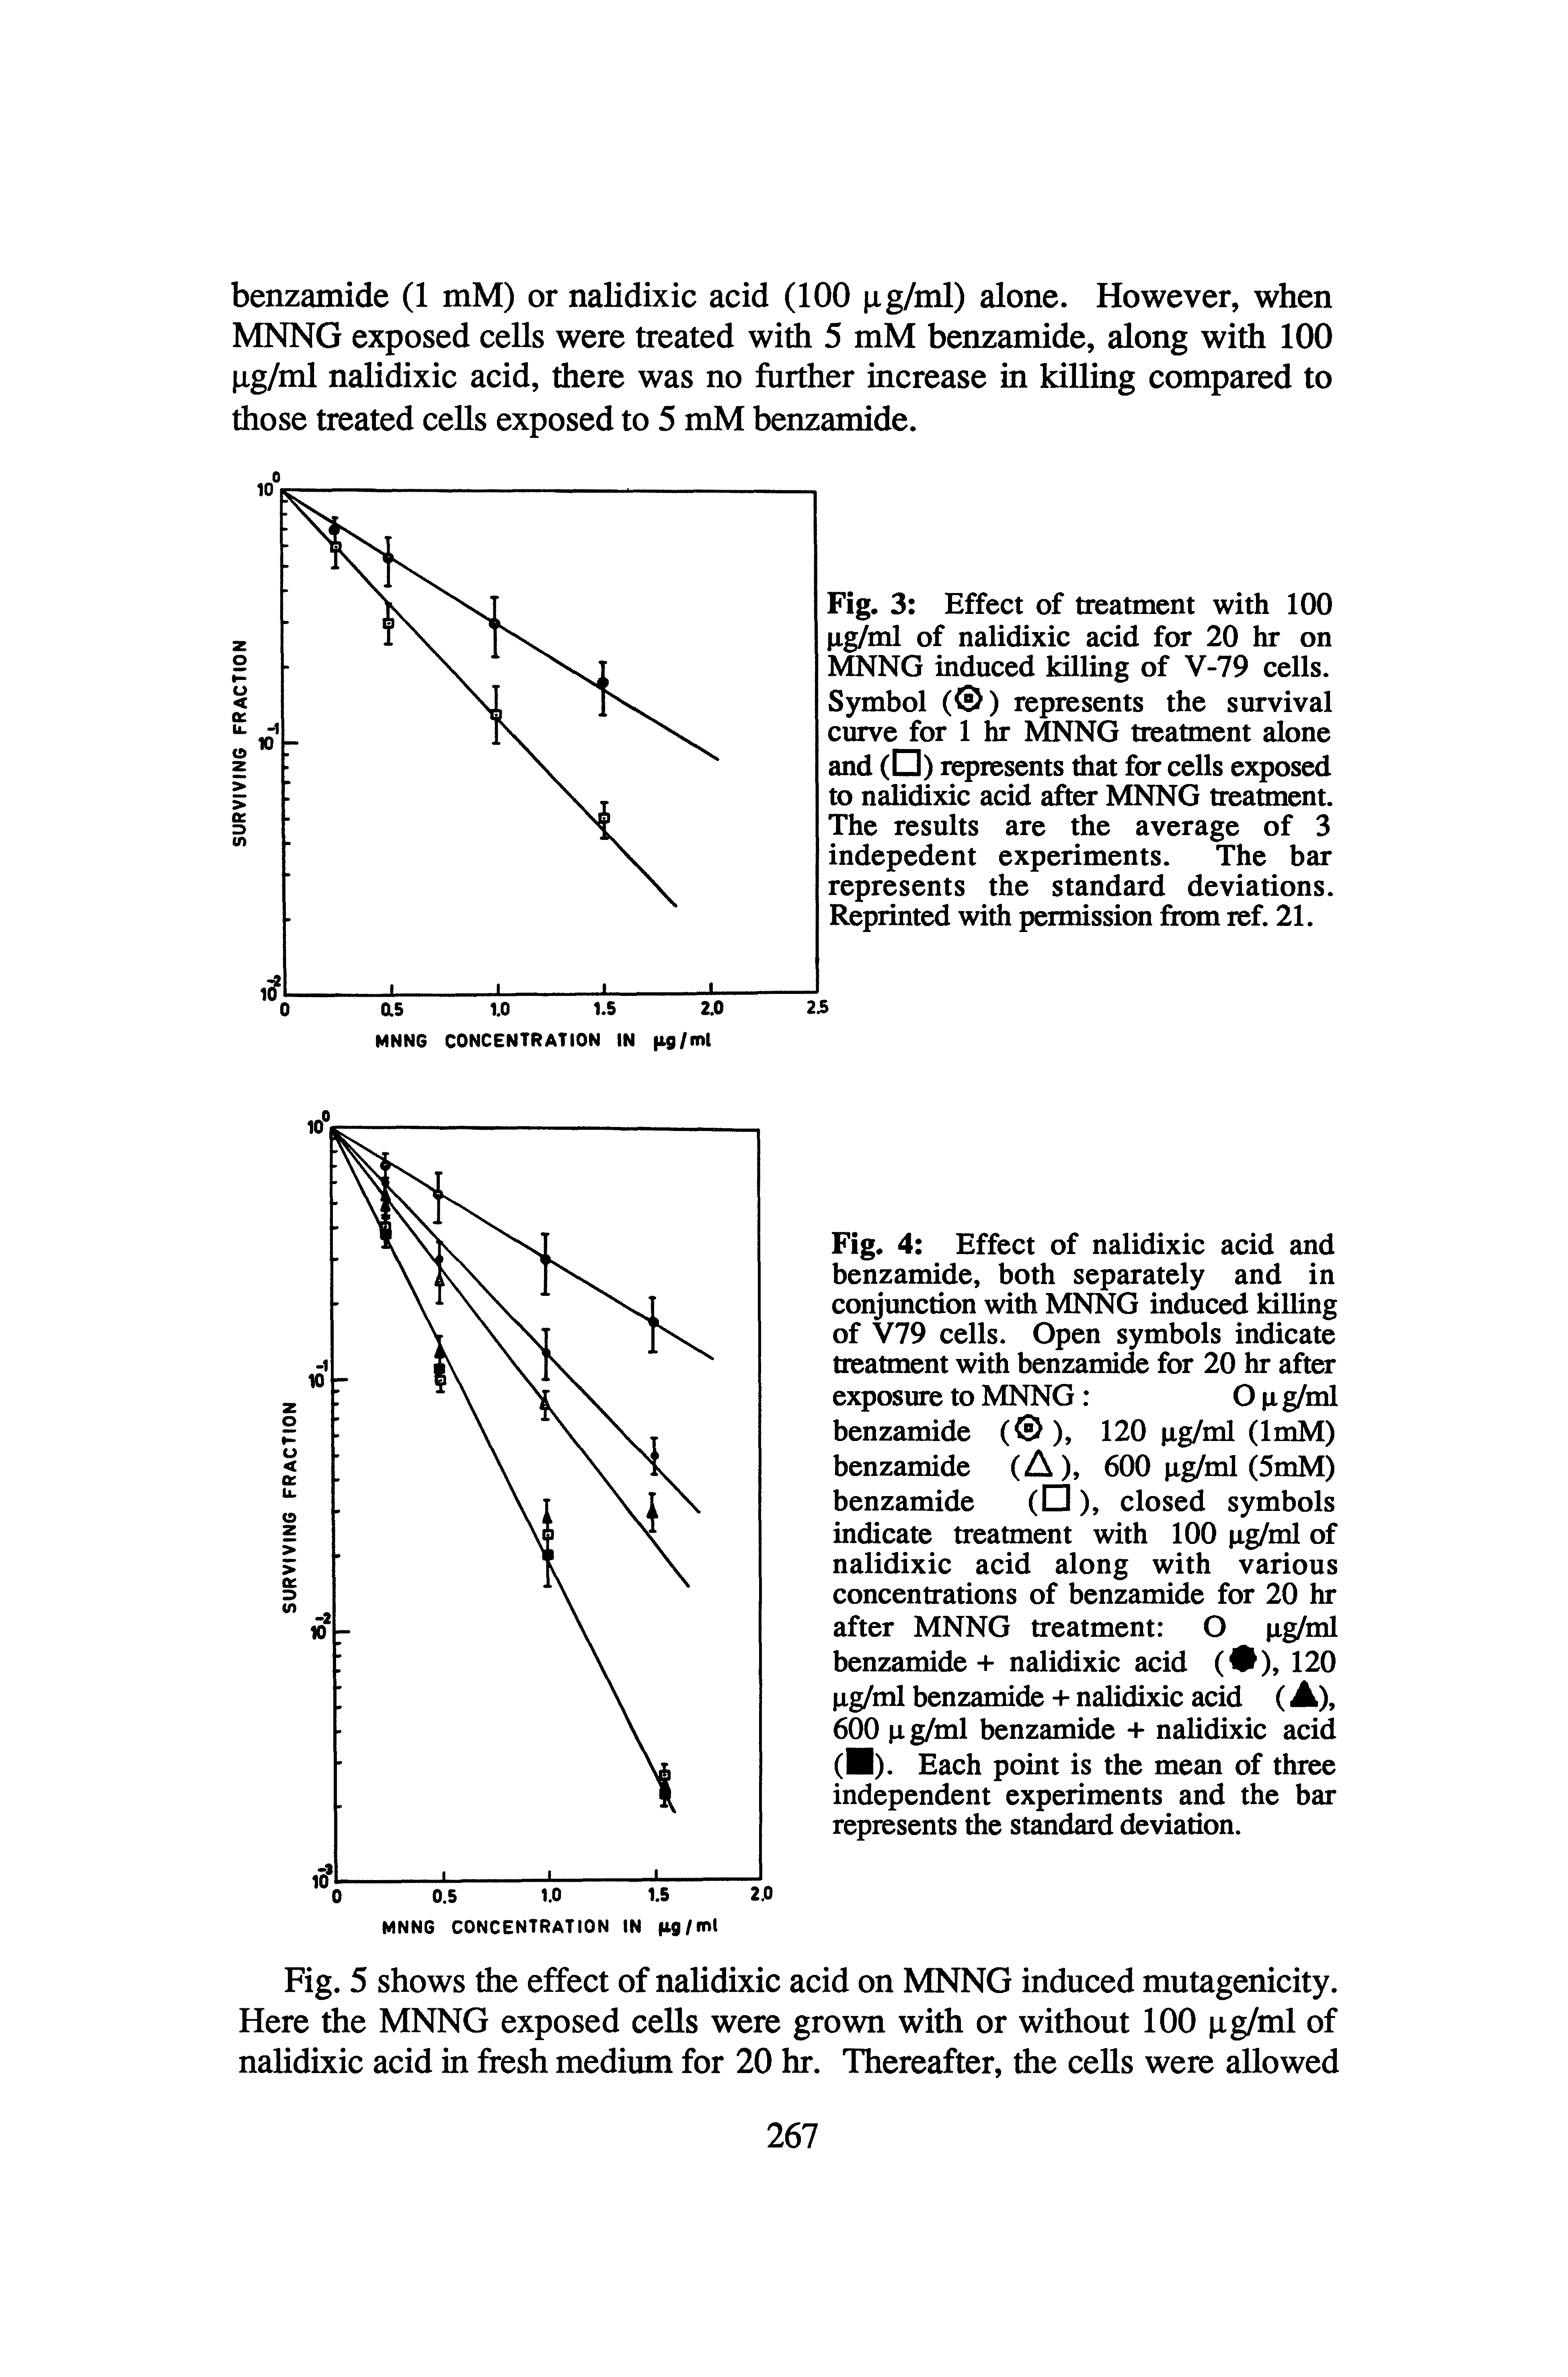 Fig. 3 Effect of treatment with 100 Lig/ml of nalidixic acid for 20 hr on MNNG induced killing of V-79 cells. Symbol ( ) represents the survival curve for 1 hr MNNG treatment alone and (G) represents that for cells exposed to n dixic acid after MNNG treatment. The results are the average of 3 indepedent experiments. The bar represents the standard deviations. Reprinted with permission from lef. 21.